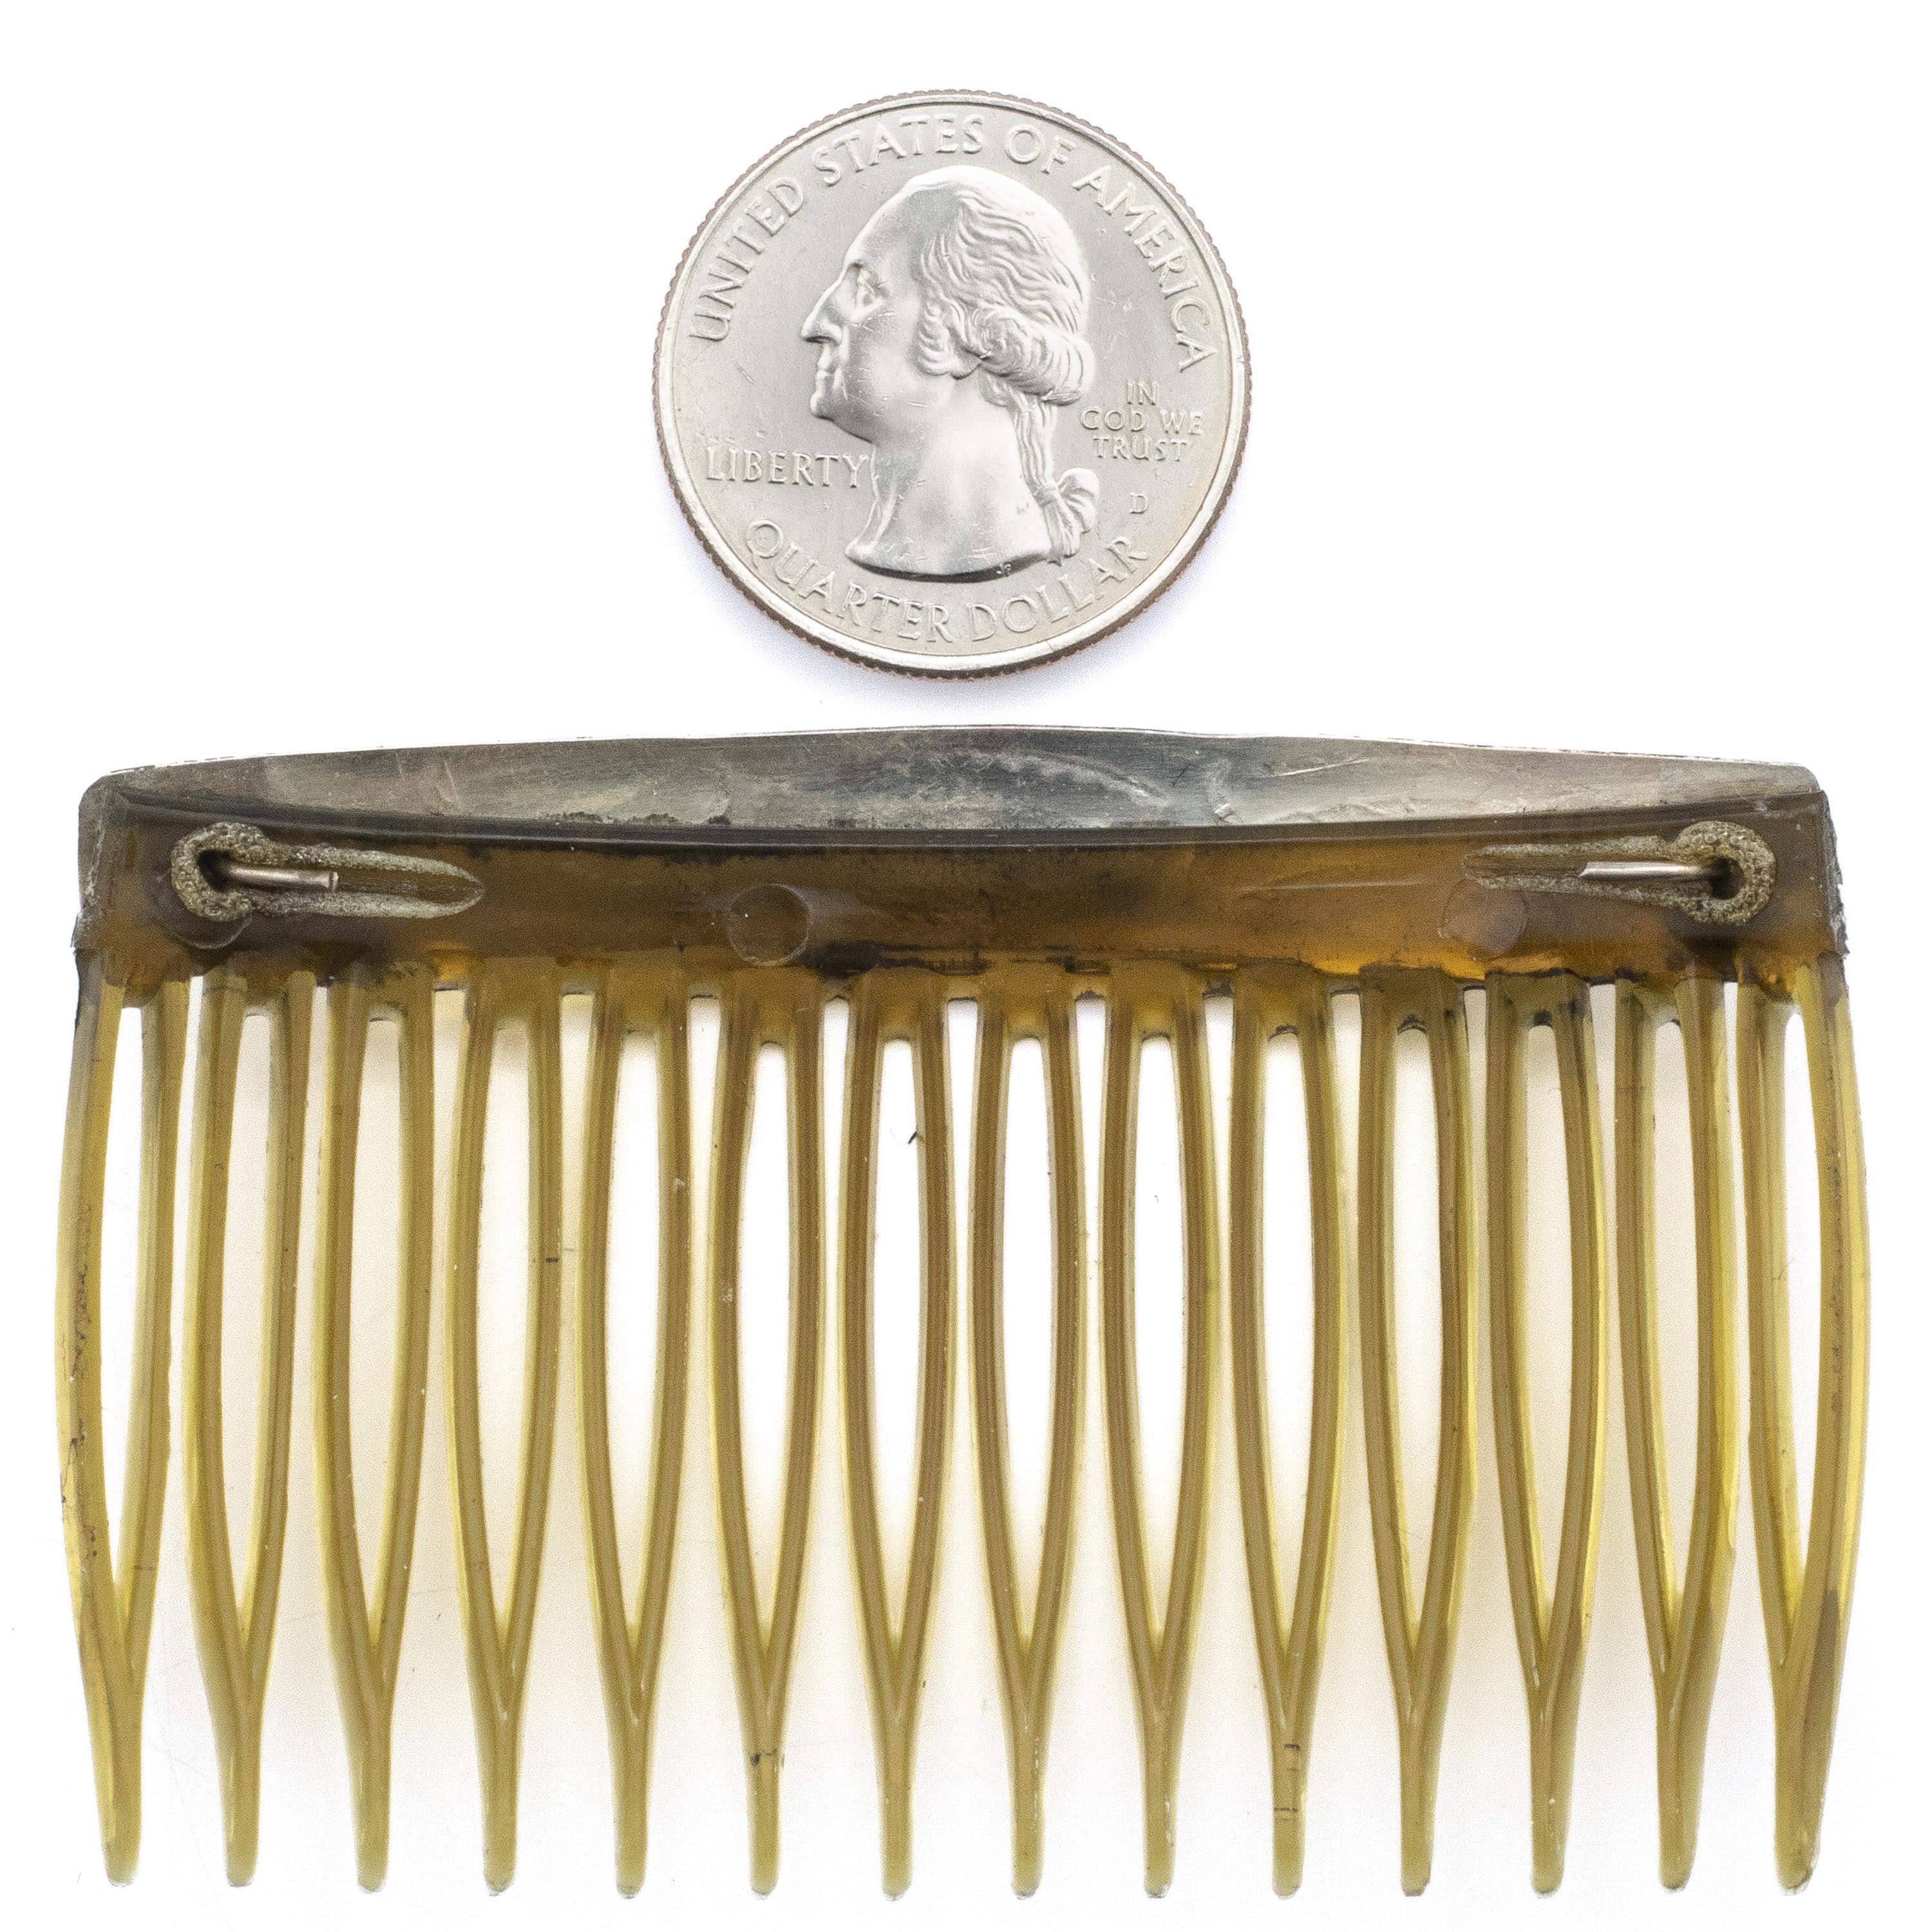 Kalifano Native American Jewelry 925 Sterling Silver USA Native American Made Hair Comb NA150.004